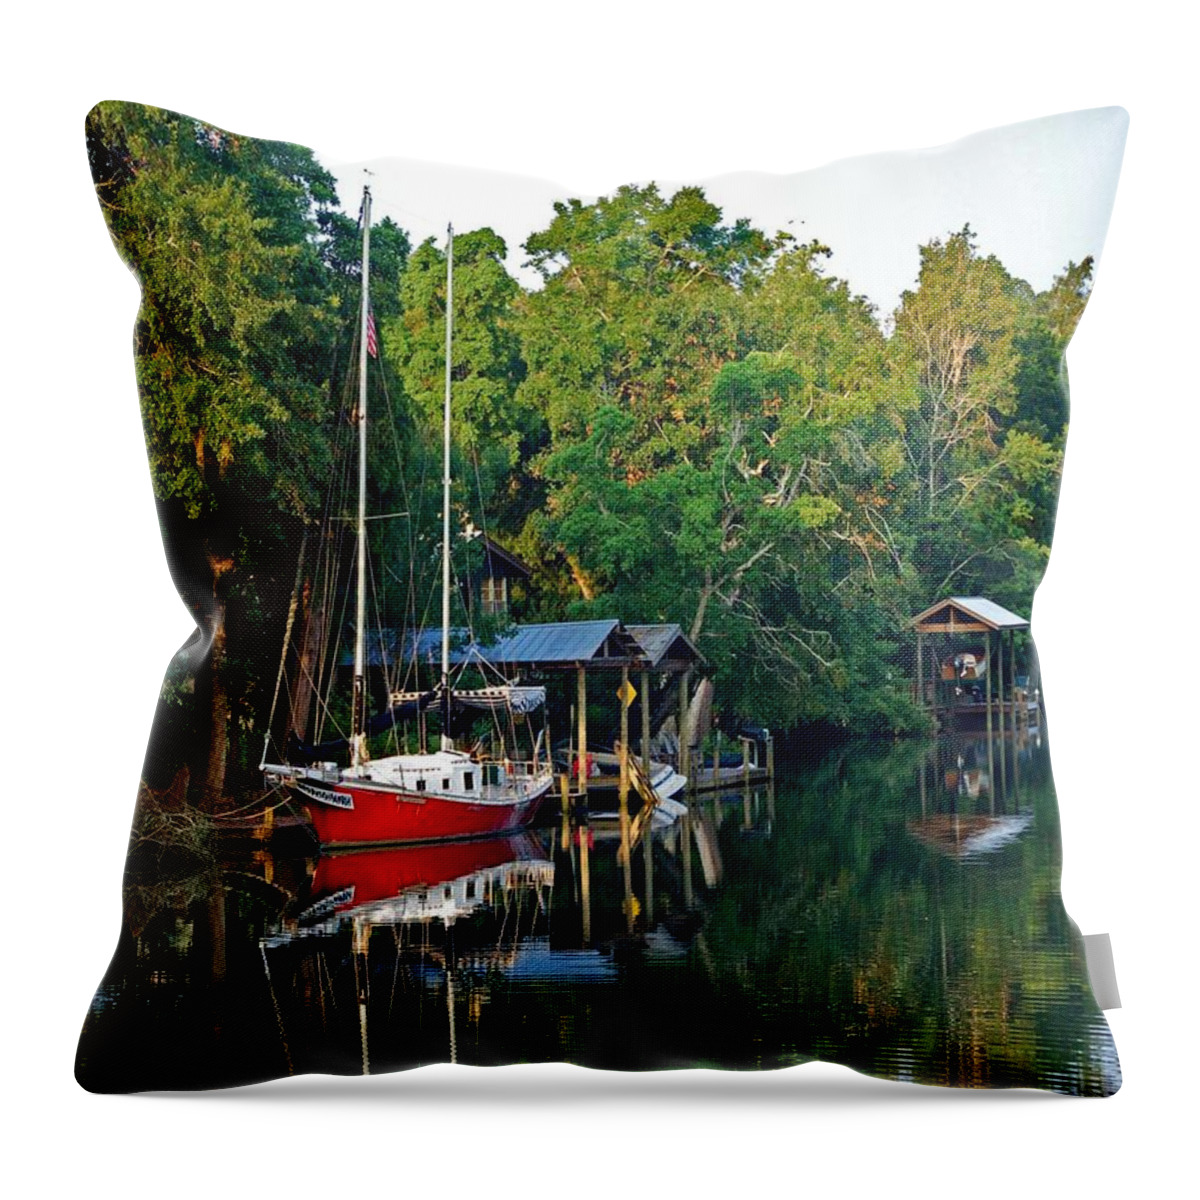 Alabama Throw Pillow featuring the digital art Magnolia Red Boat by Michael Thomas